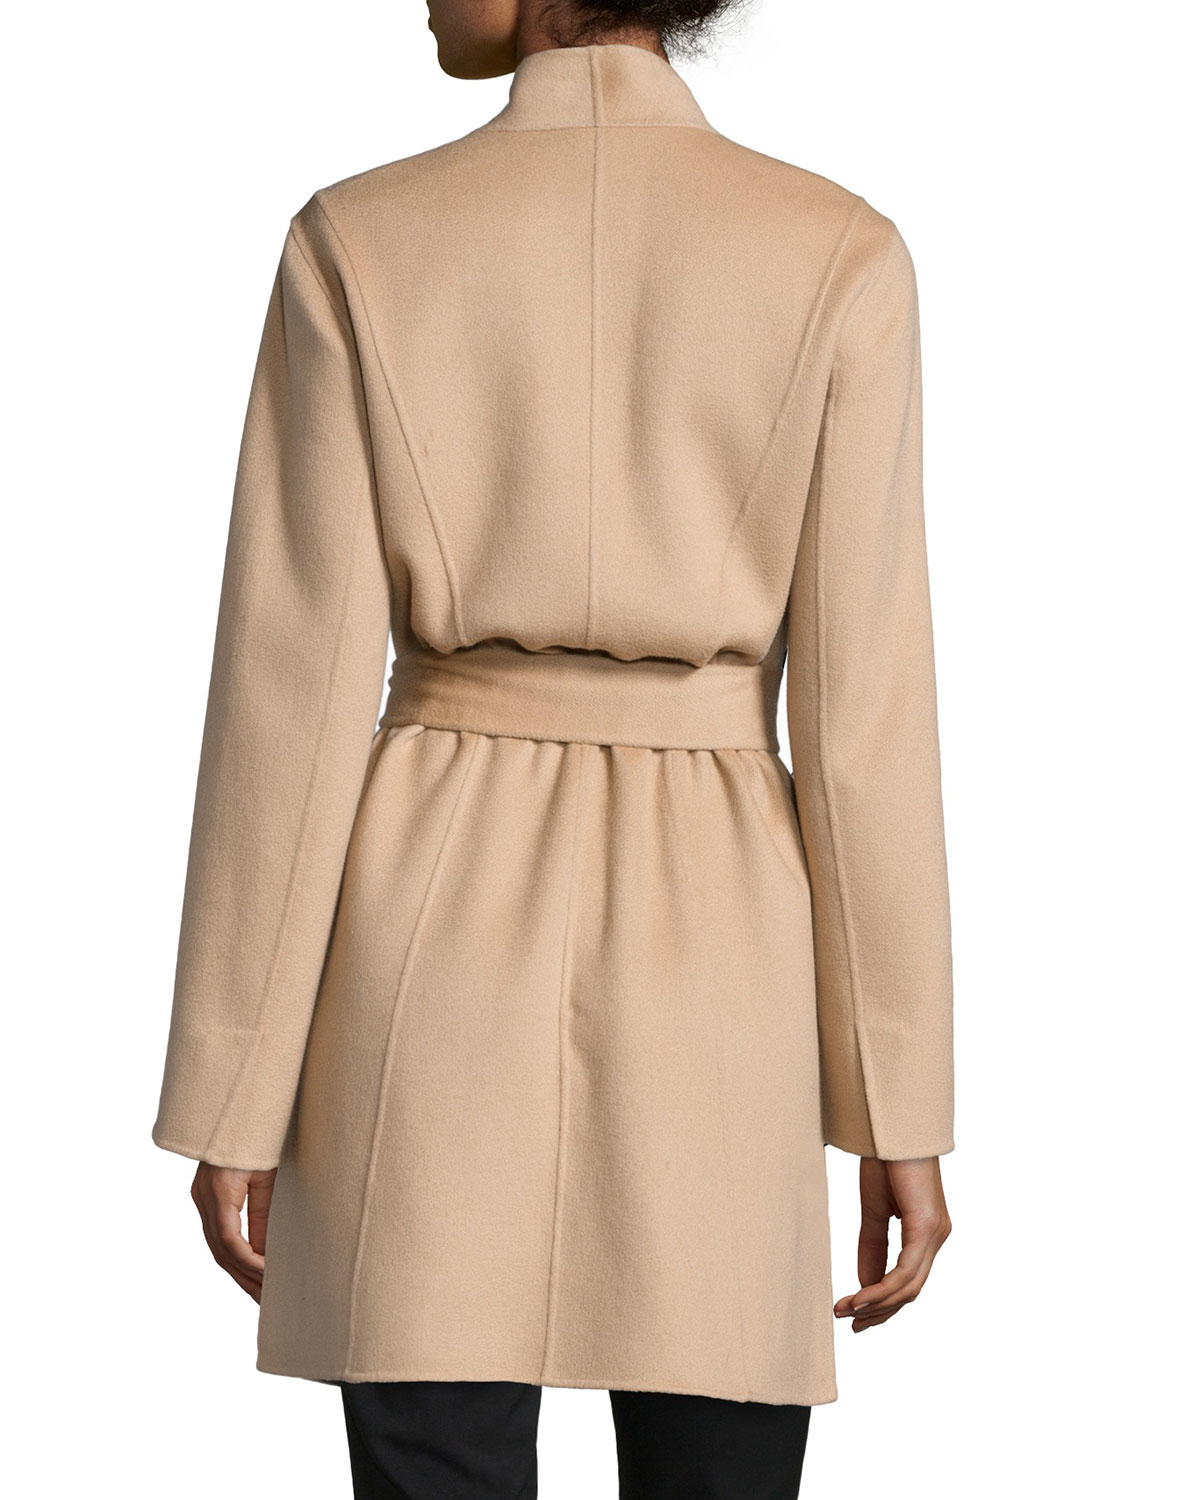 Lyst - Neiman Marcus Double-face Woven Cashmere Coat in Natural